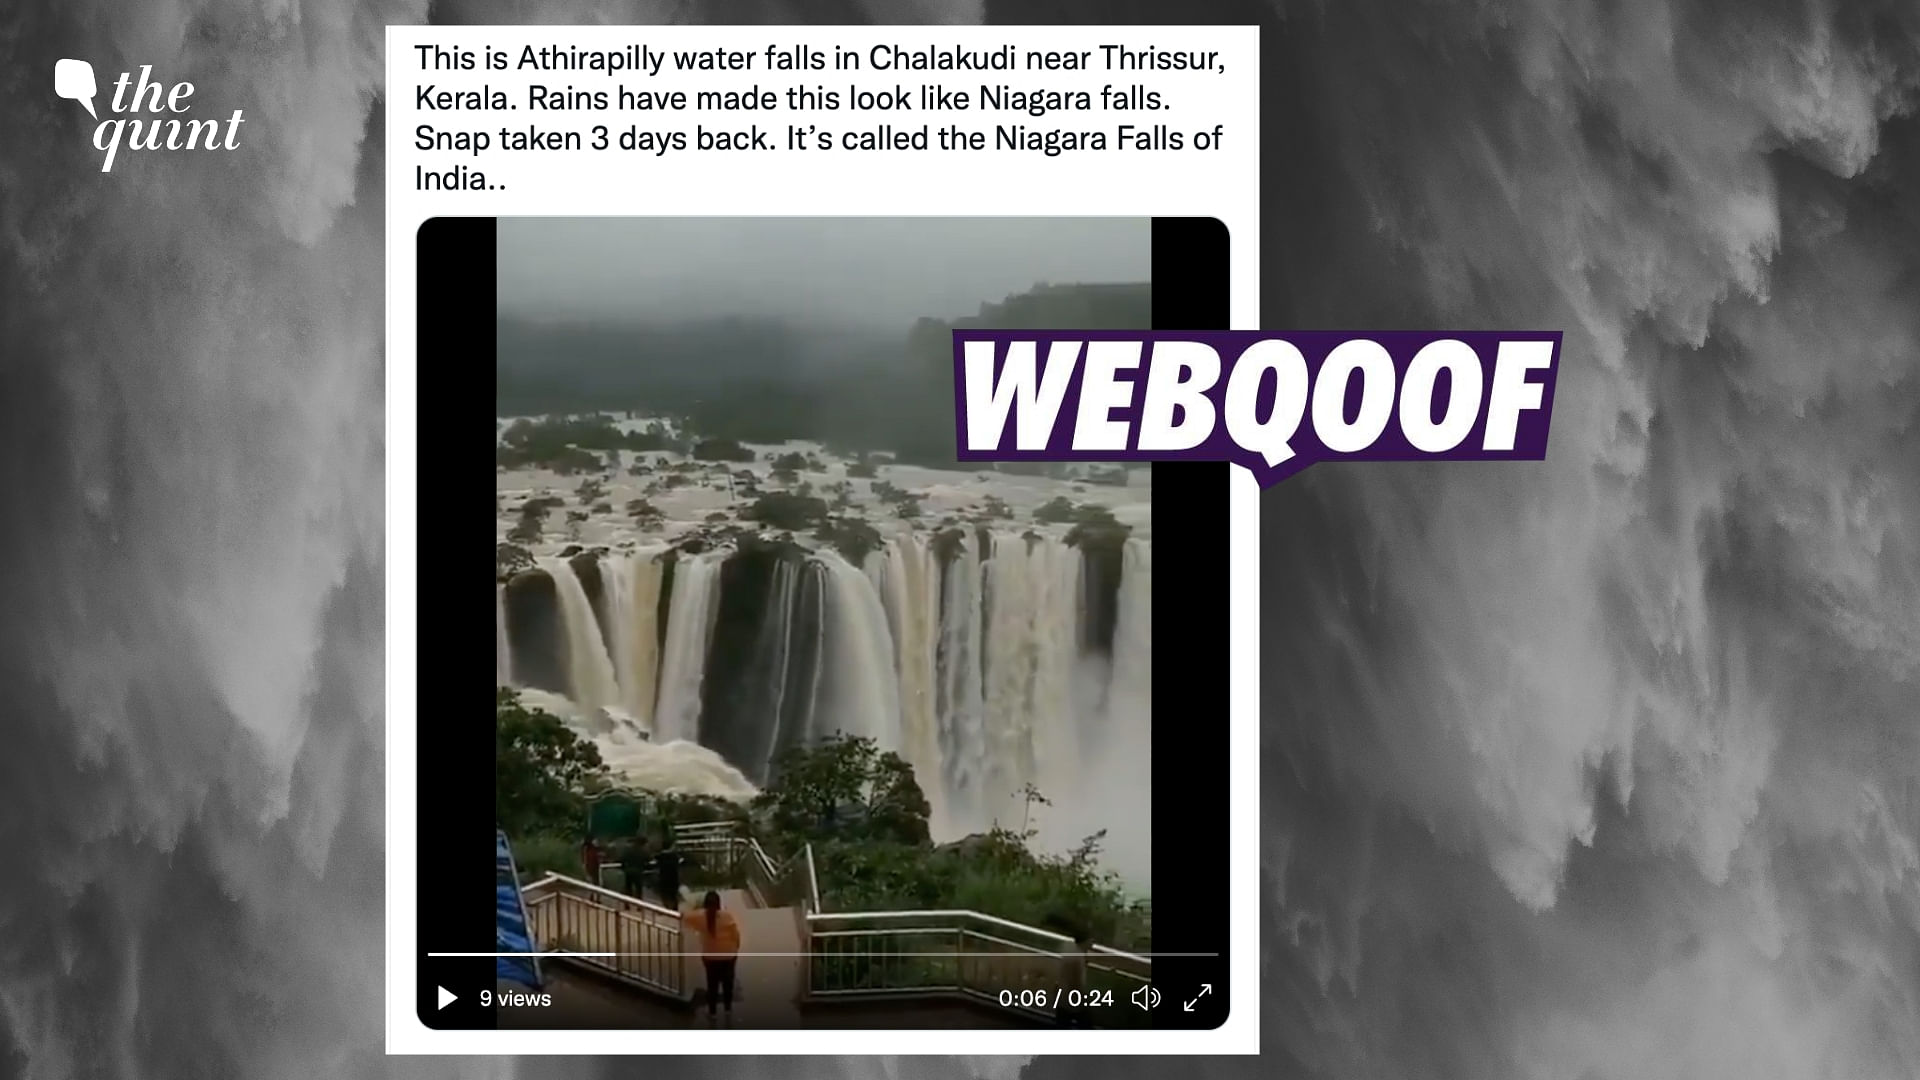 <div class="paragraphs"><p>The claim states that the photo is of the Athirappally falls in Kerala.&nbsp;</p></div>